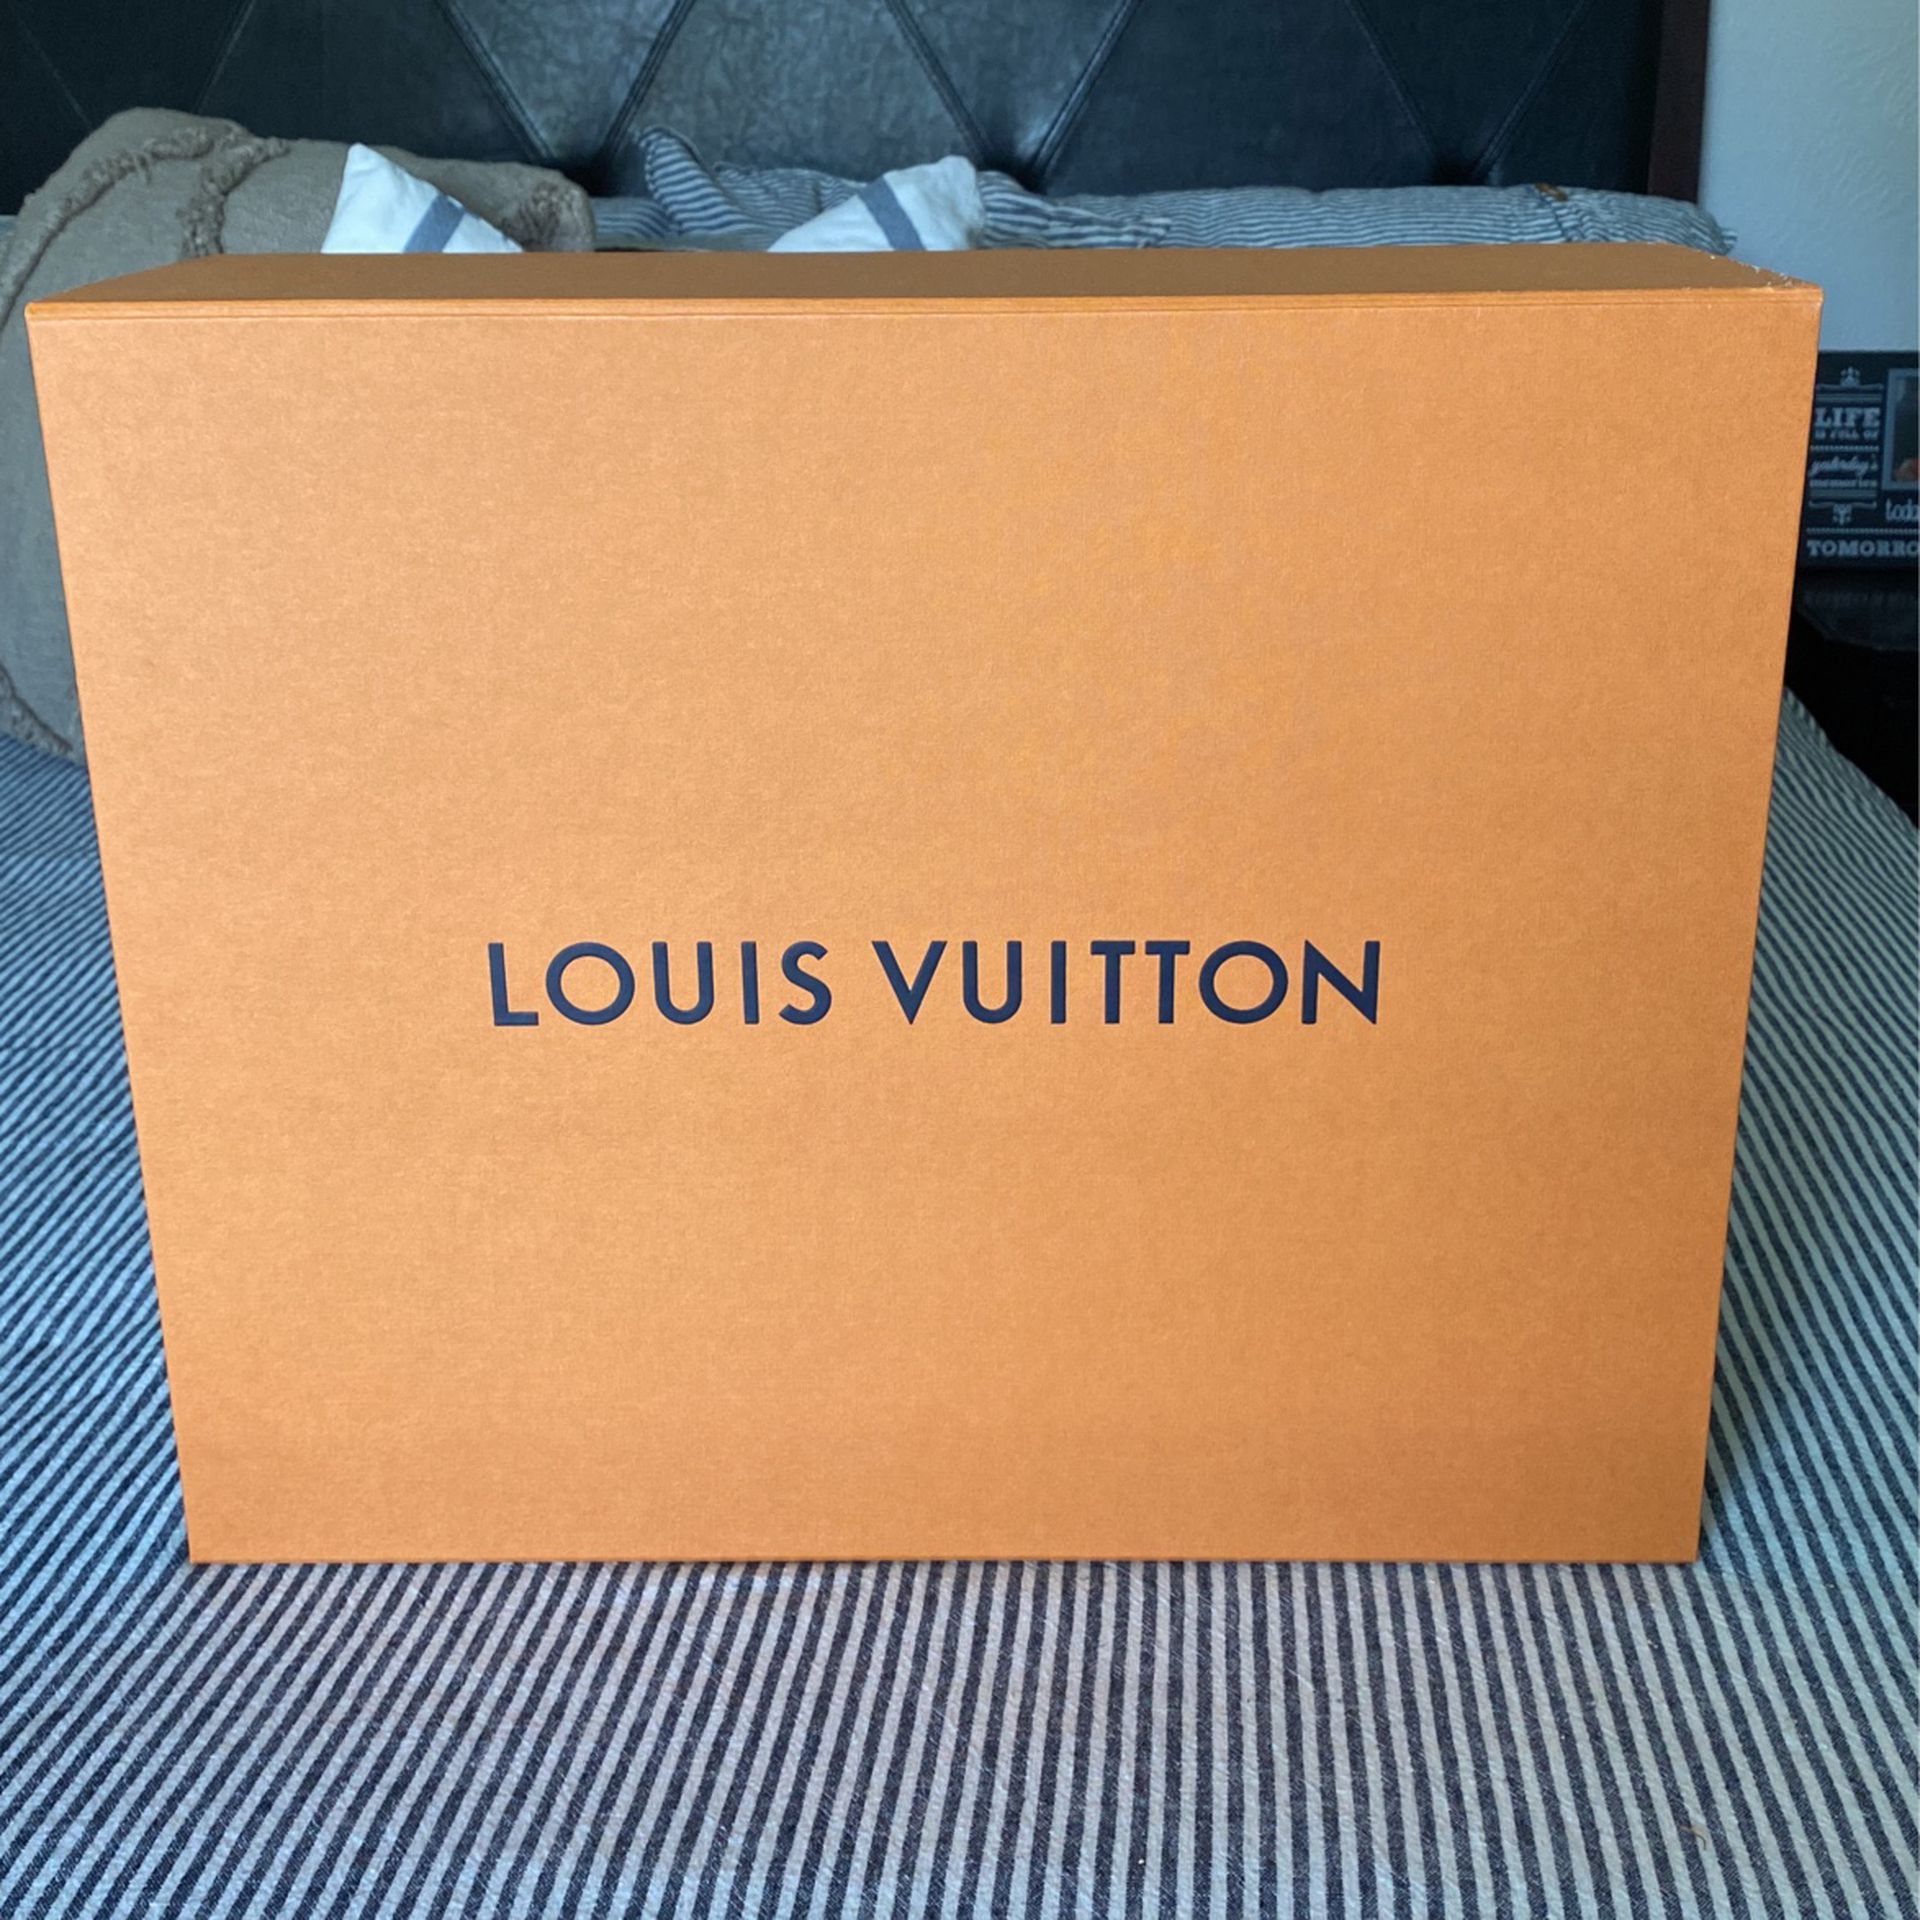 Louis Vuitton box-ONLY $40 for Sale in Plano, TX - OfferUp